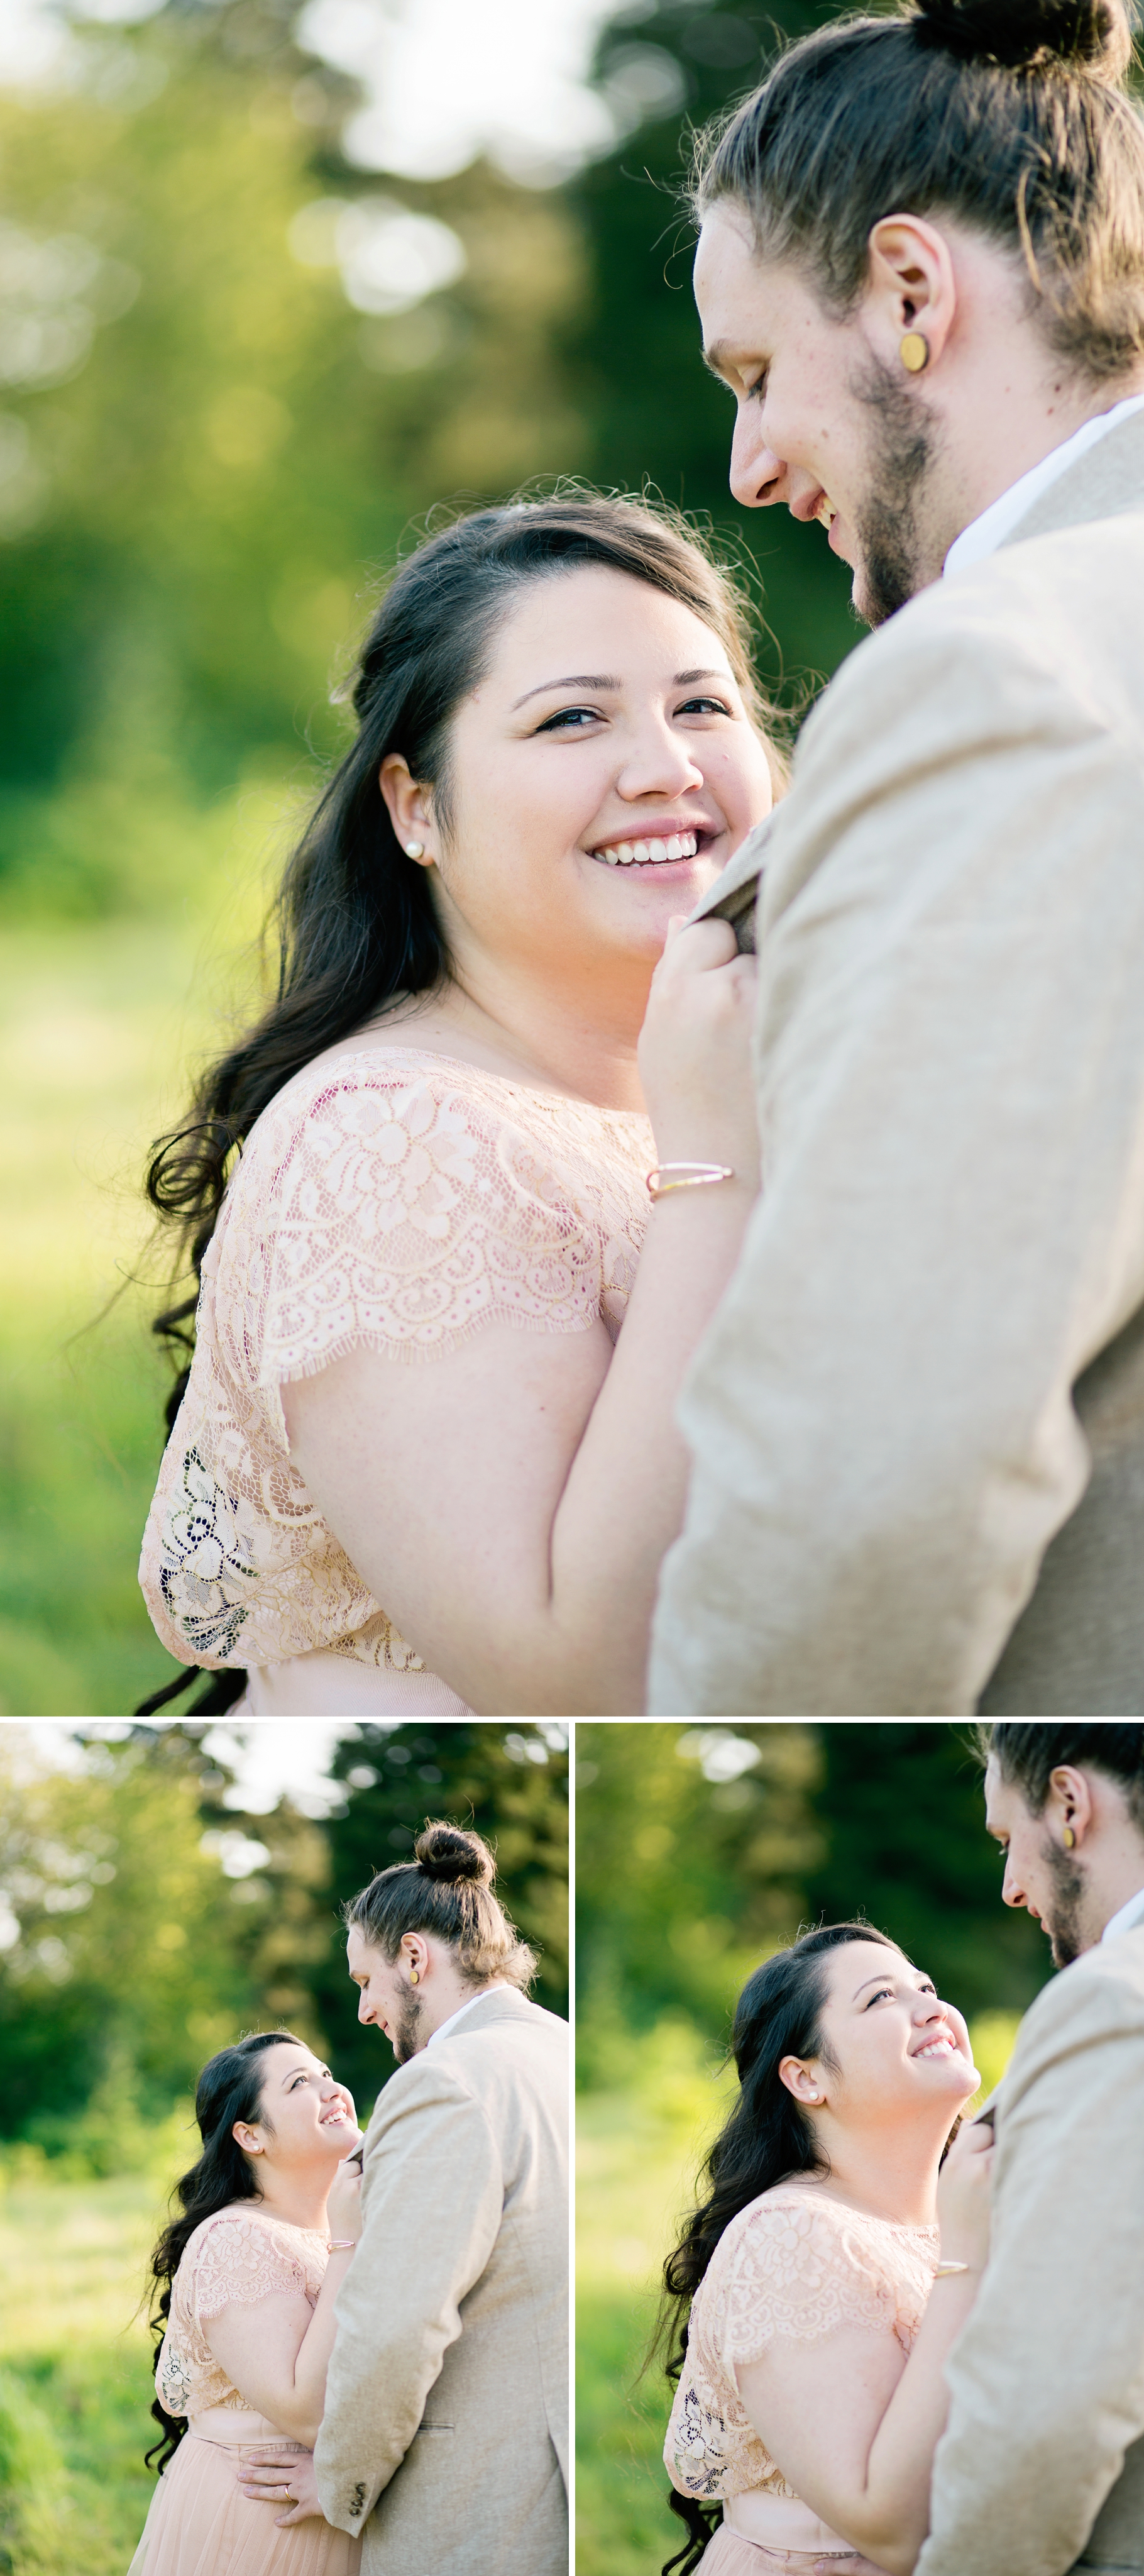 20-Bride-Groom-Portraits-Married-Discovery-Park-Elopement-Seattle-Photographer-Wedding-Photography-by-Betty-Elaine